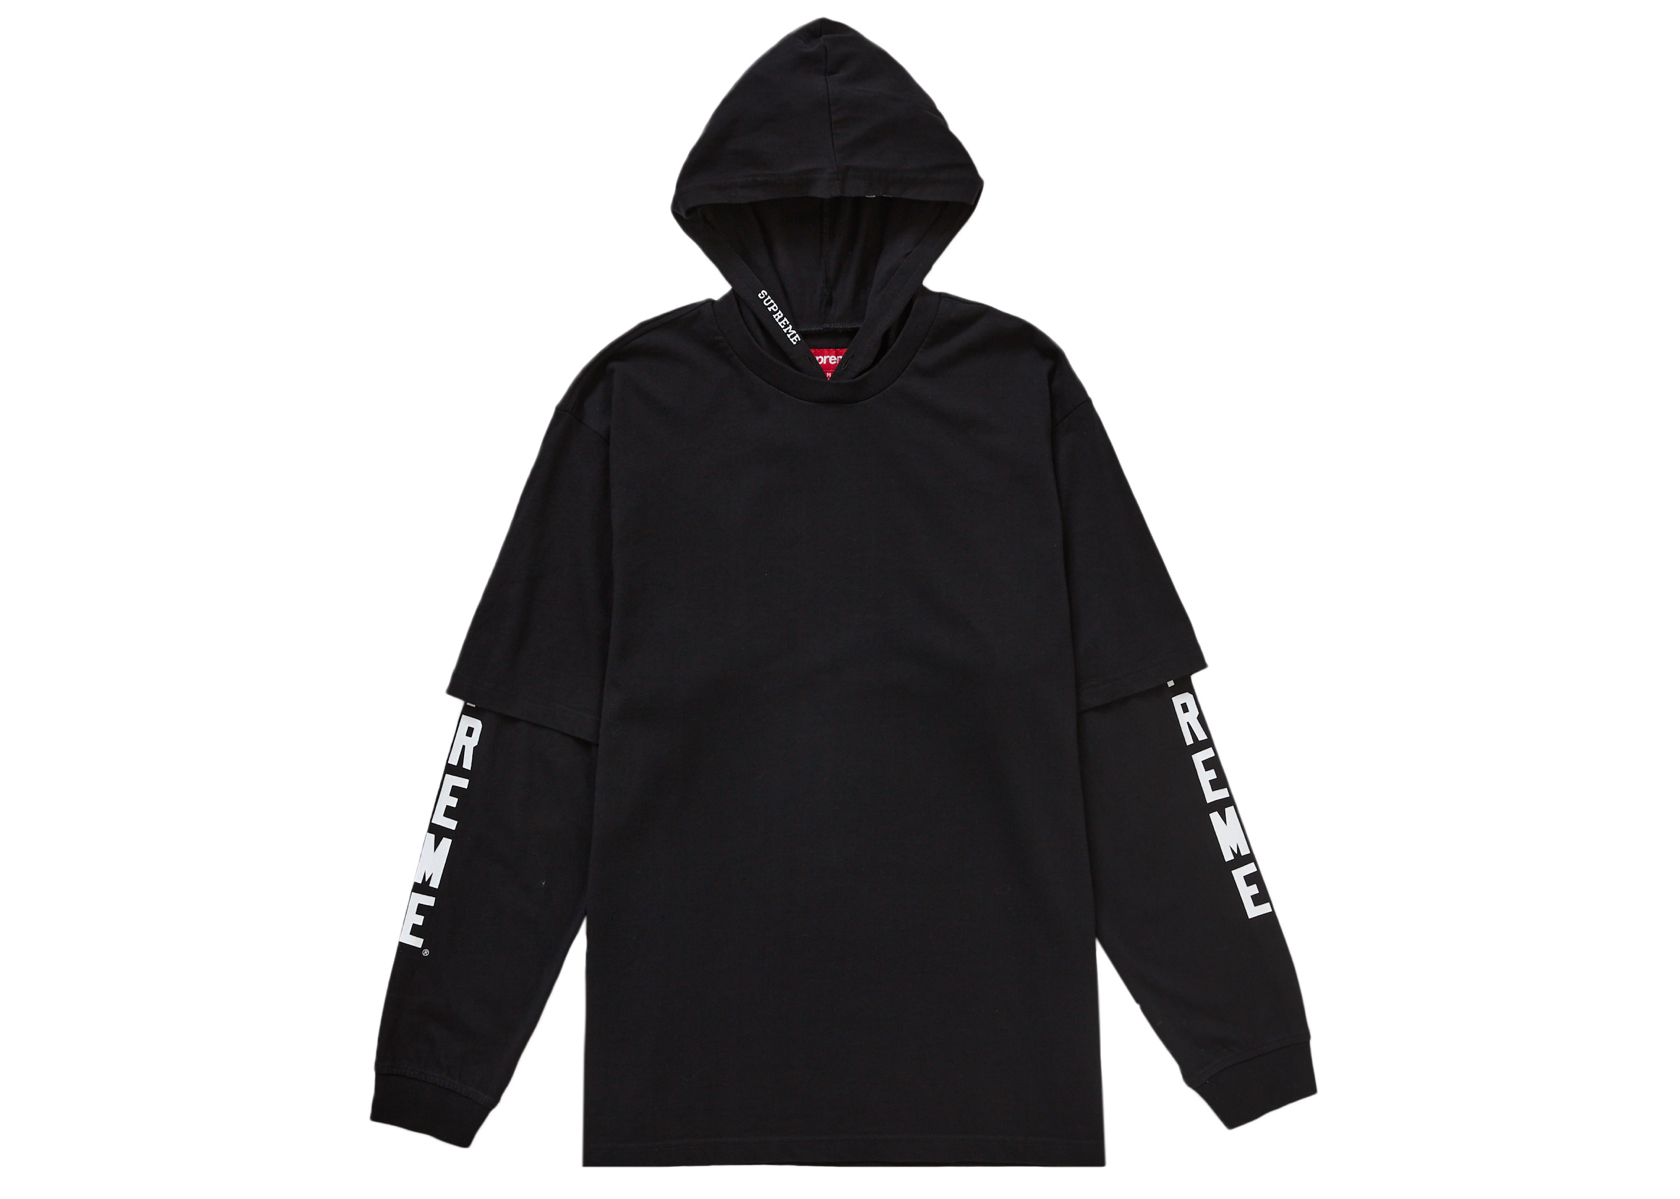 MotionlogoSupreme Layered Hooded L/S Top \